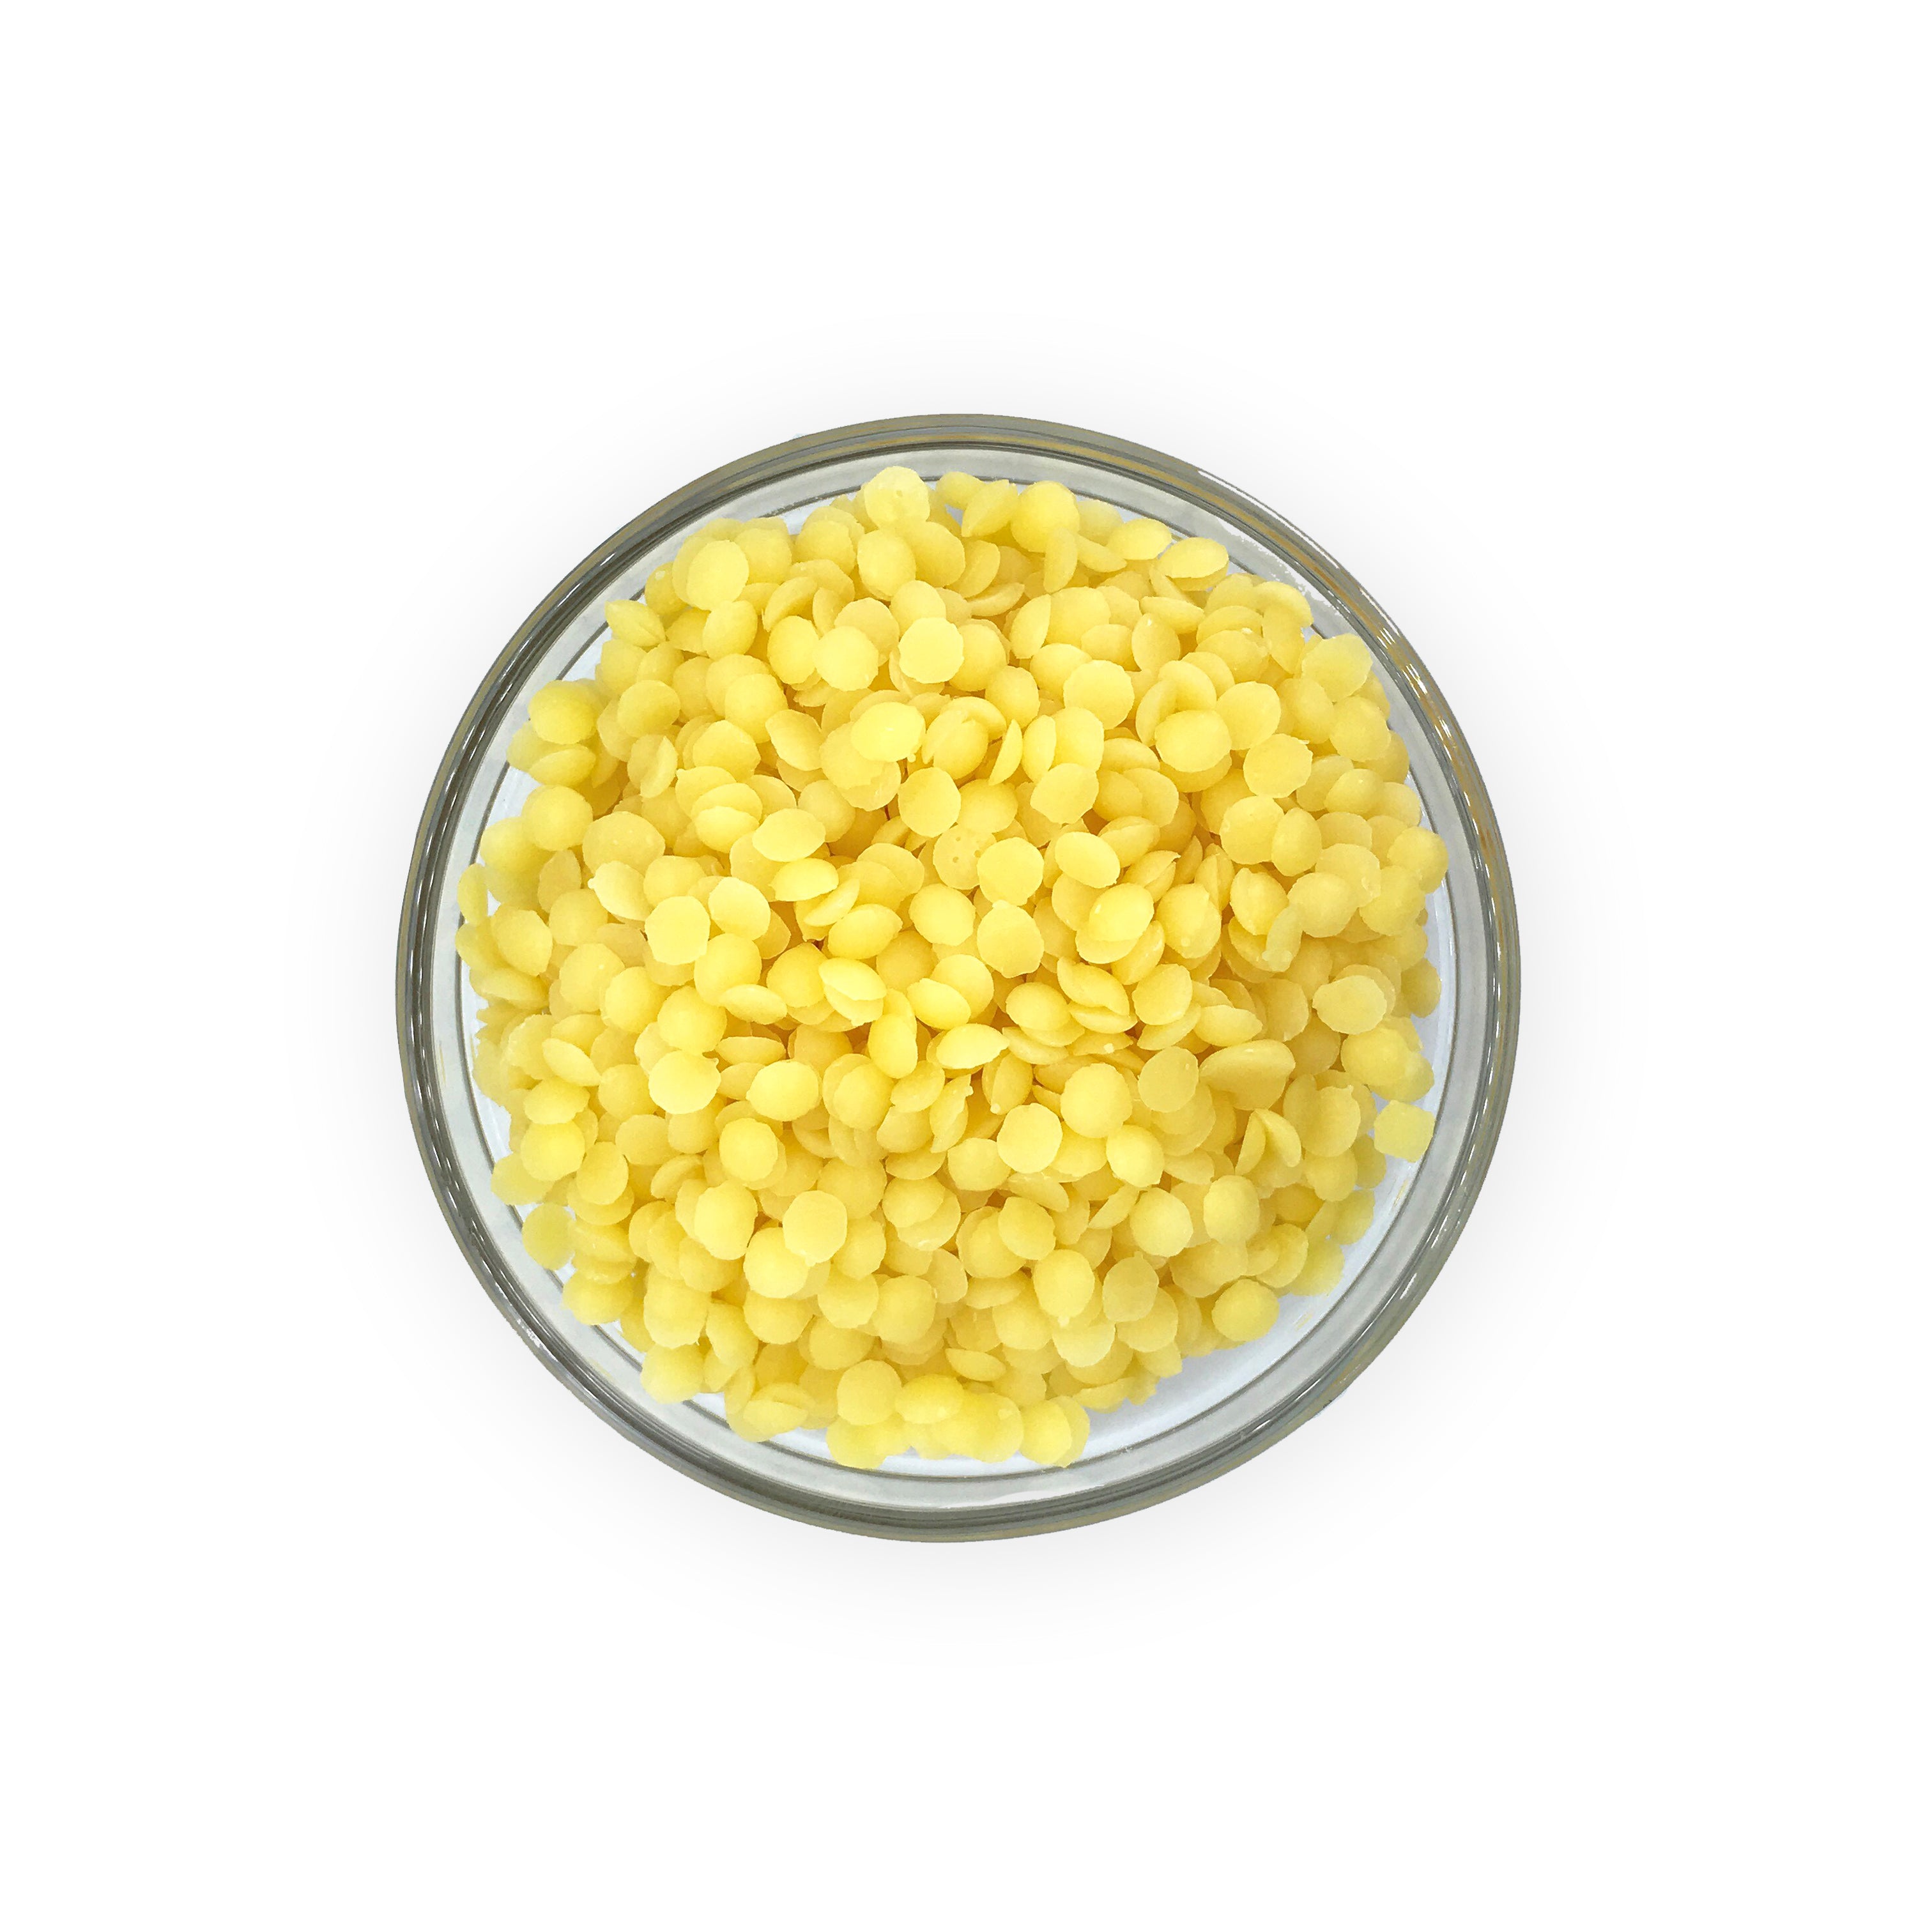 Wuna 5lb White Beeswax Pellets Food Grade White Beeswax Beads Triple Filtered Beeswax for Candle Making Beeswax Pastilles for DIY Creams Lotions Lip Balm